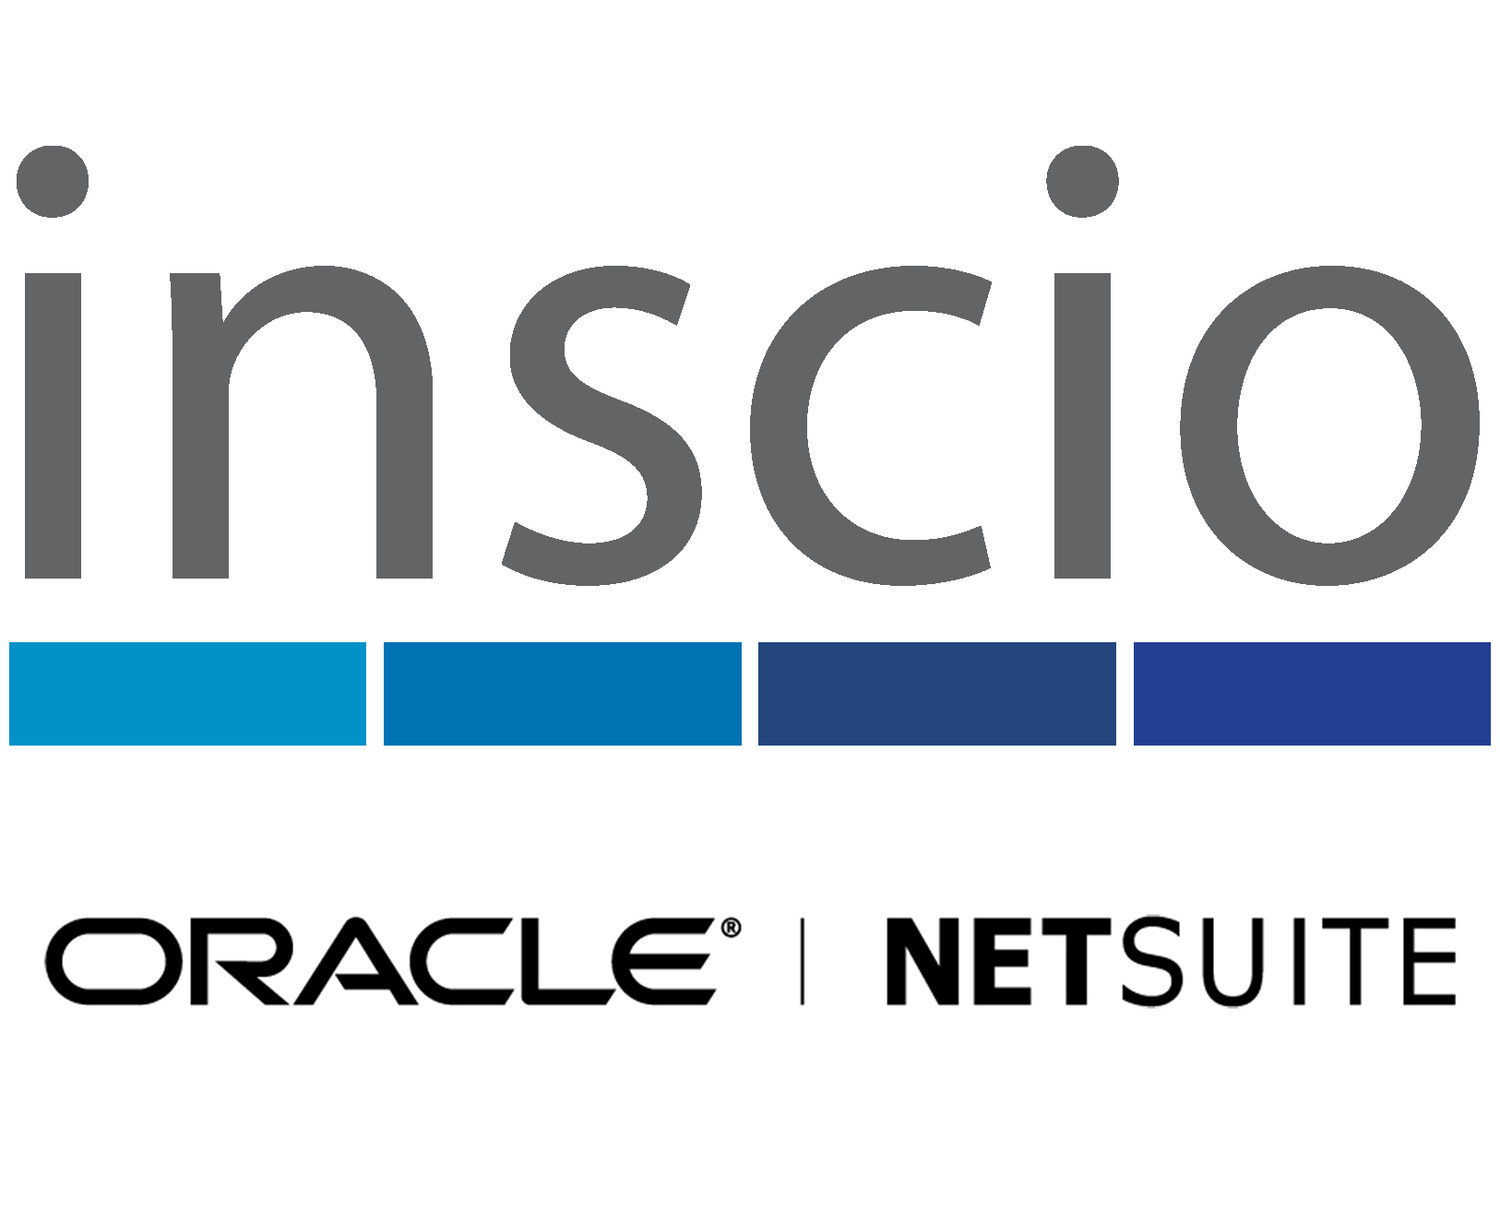 Inscio makes NetSuite much easier for customers to buy, implement and use.